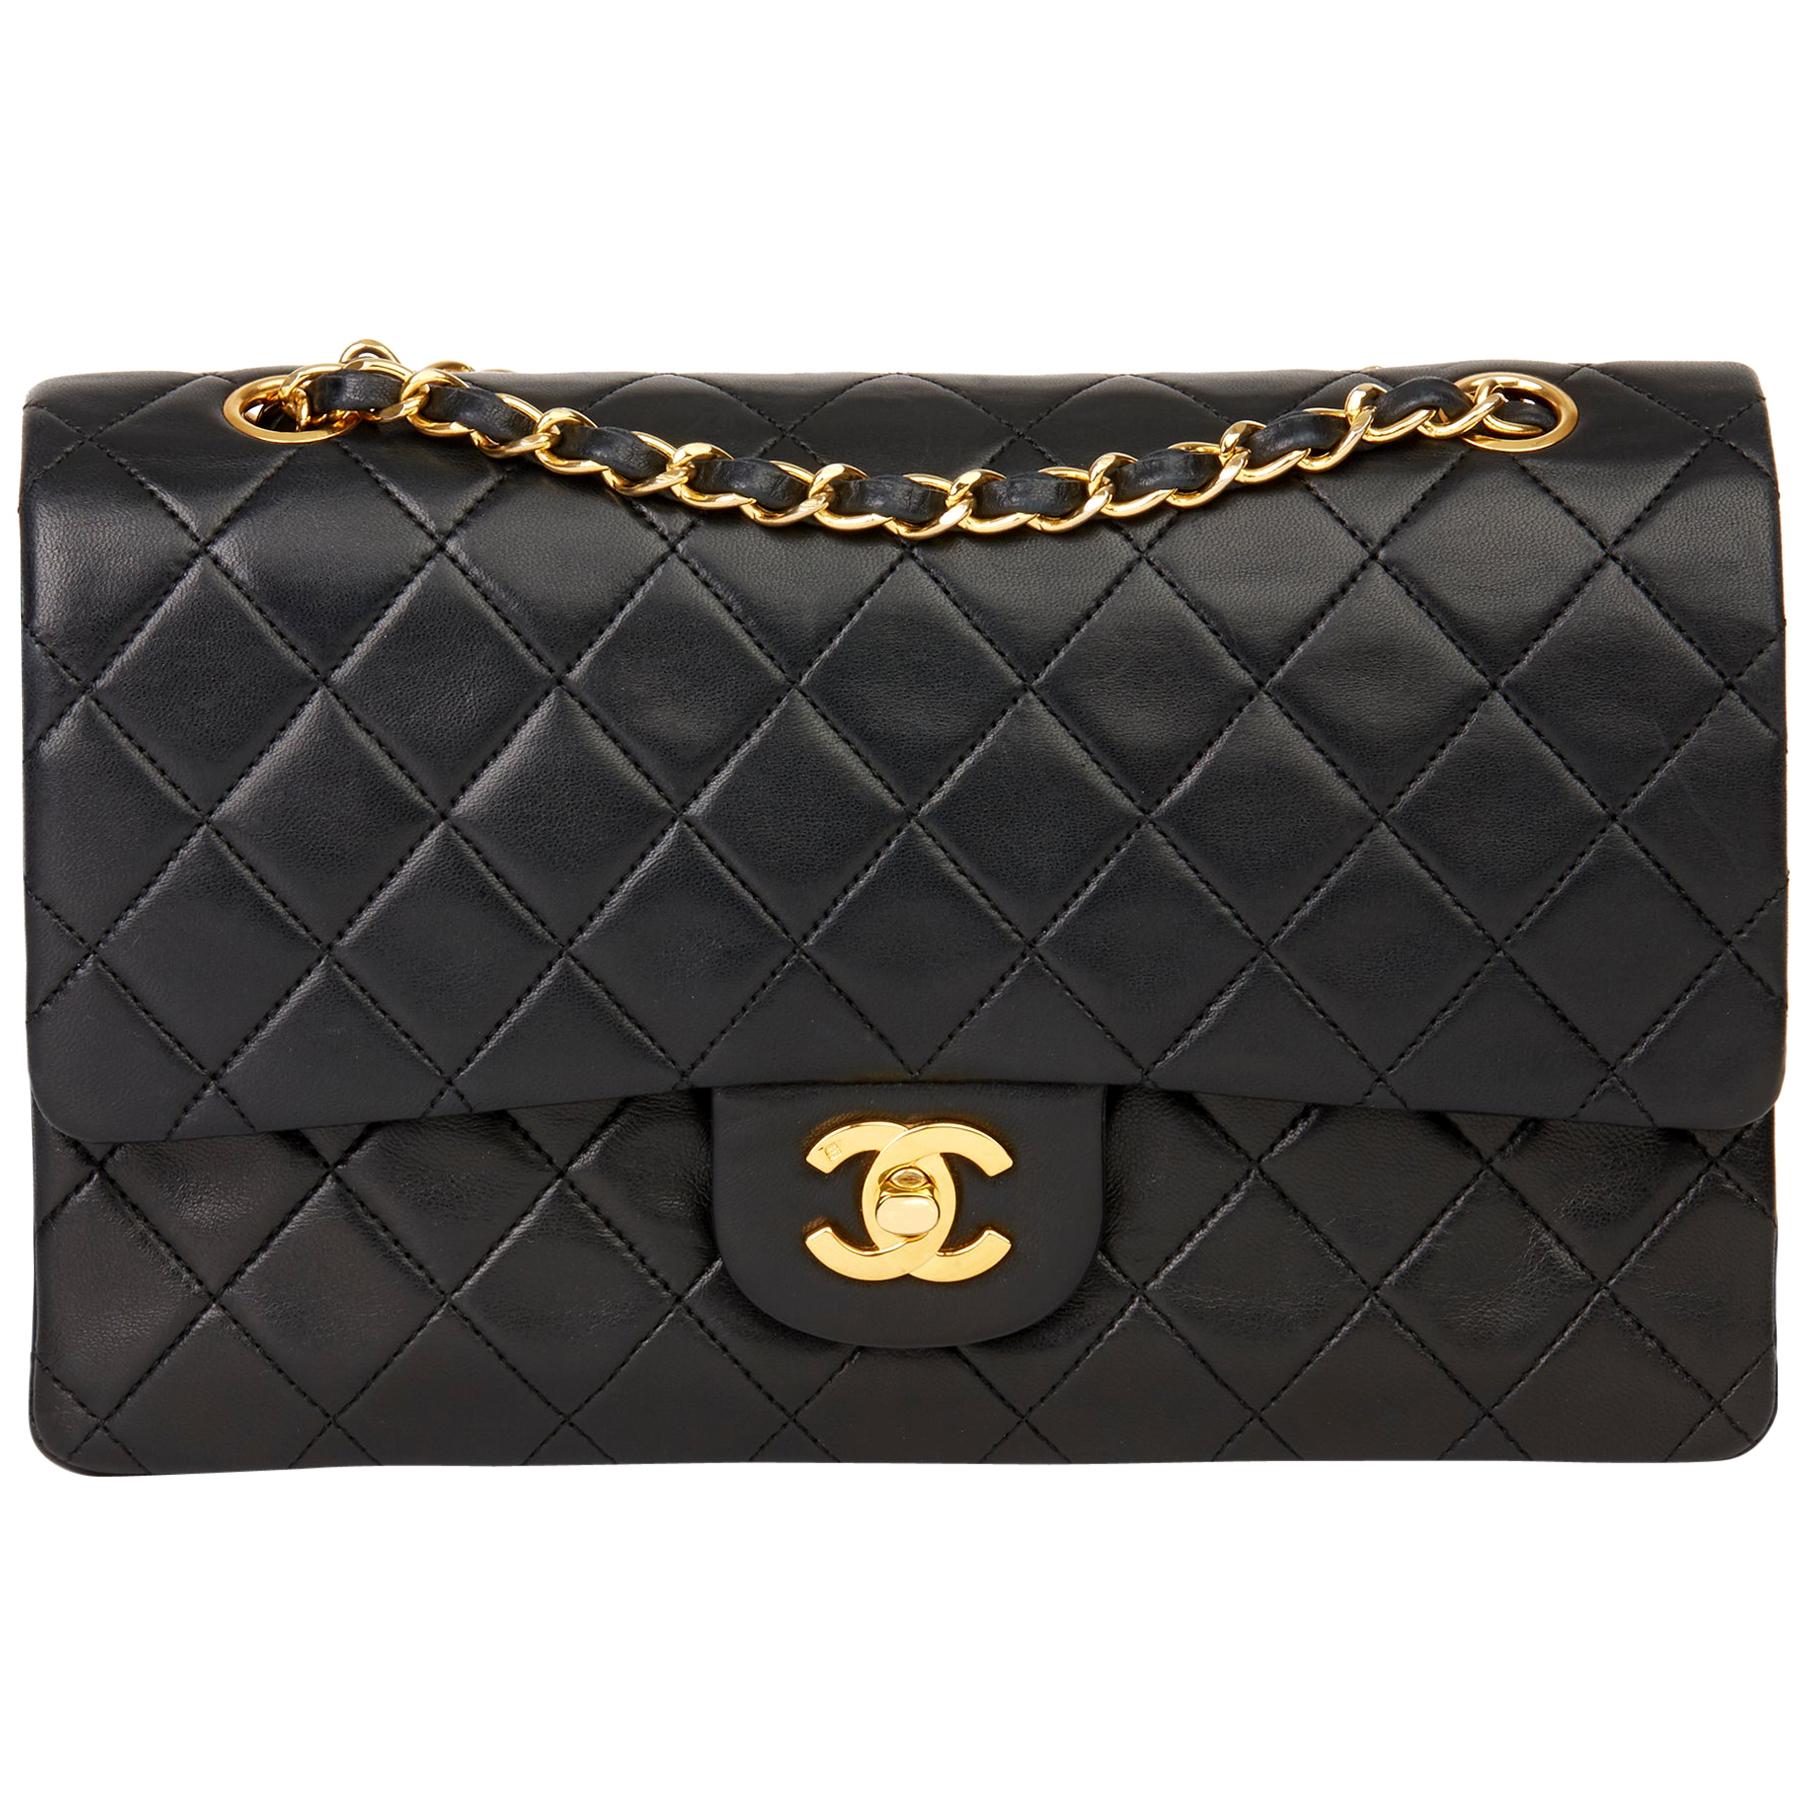 1991 Chanel Black Quilted Lambskin Vintage Medium Classic Double Flap Bag